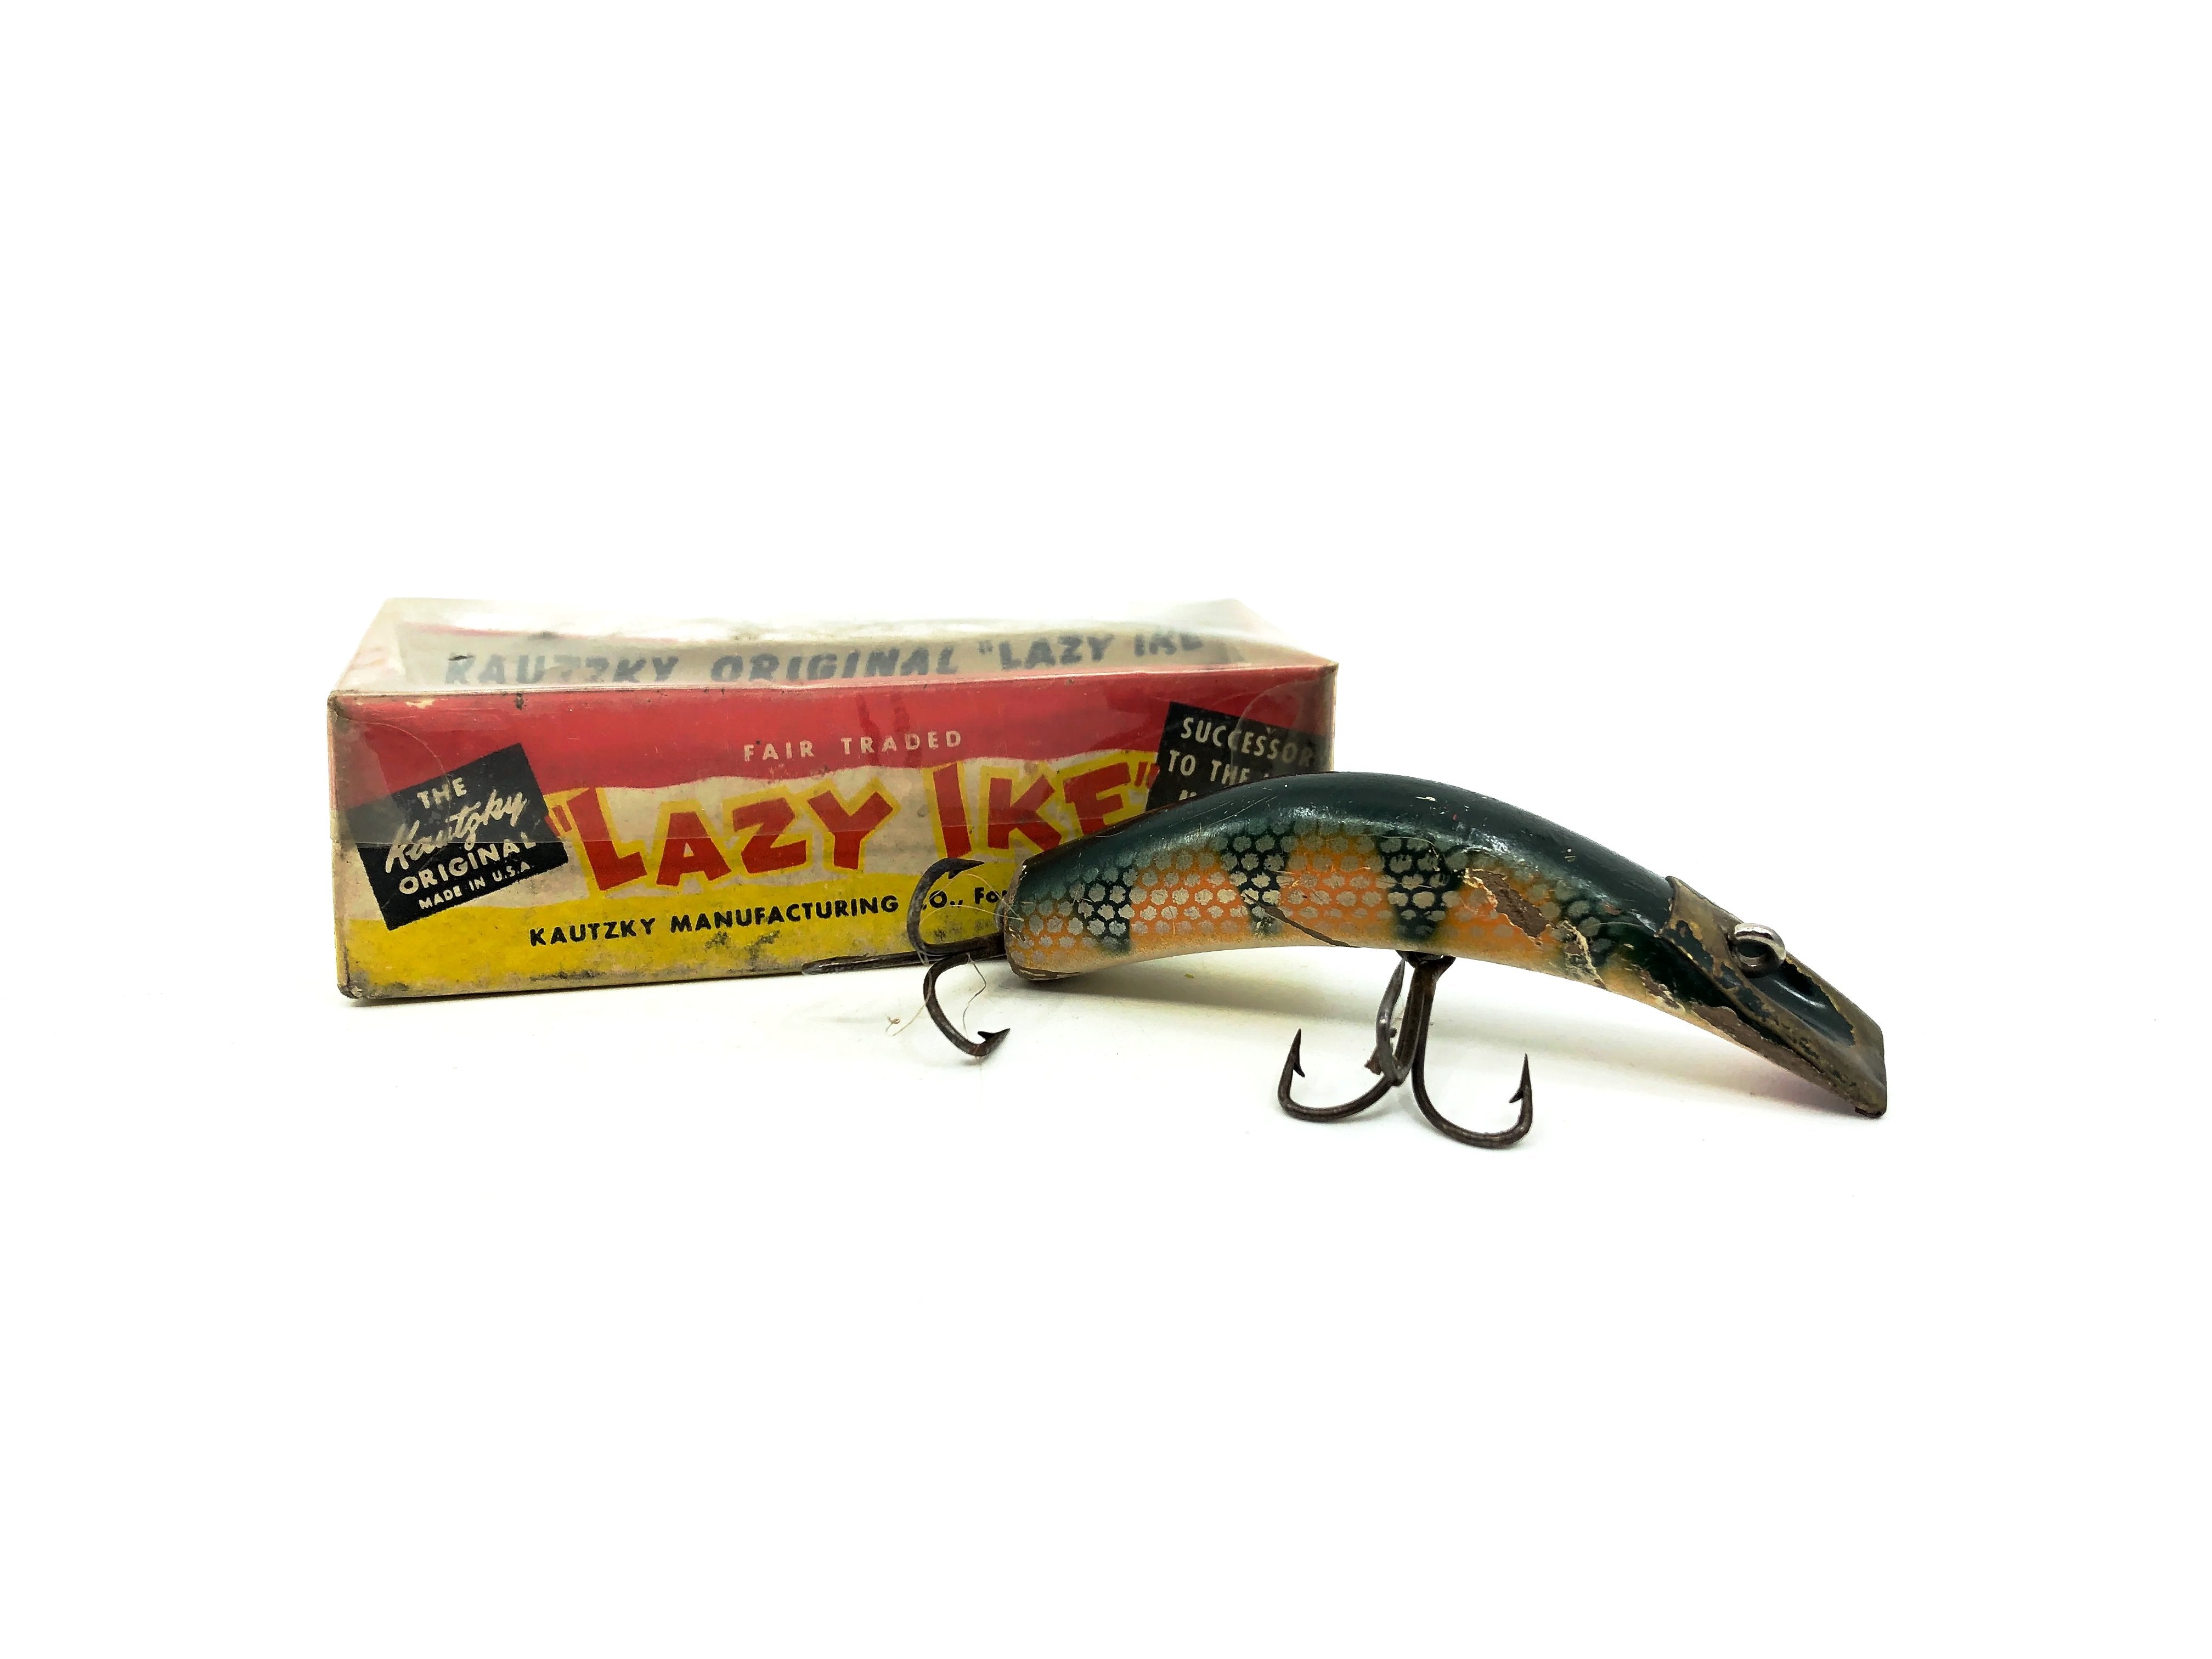 Kautzky Lazy Ike 3 KL-33 Wooden, Perch Color with Box – My Bait